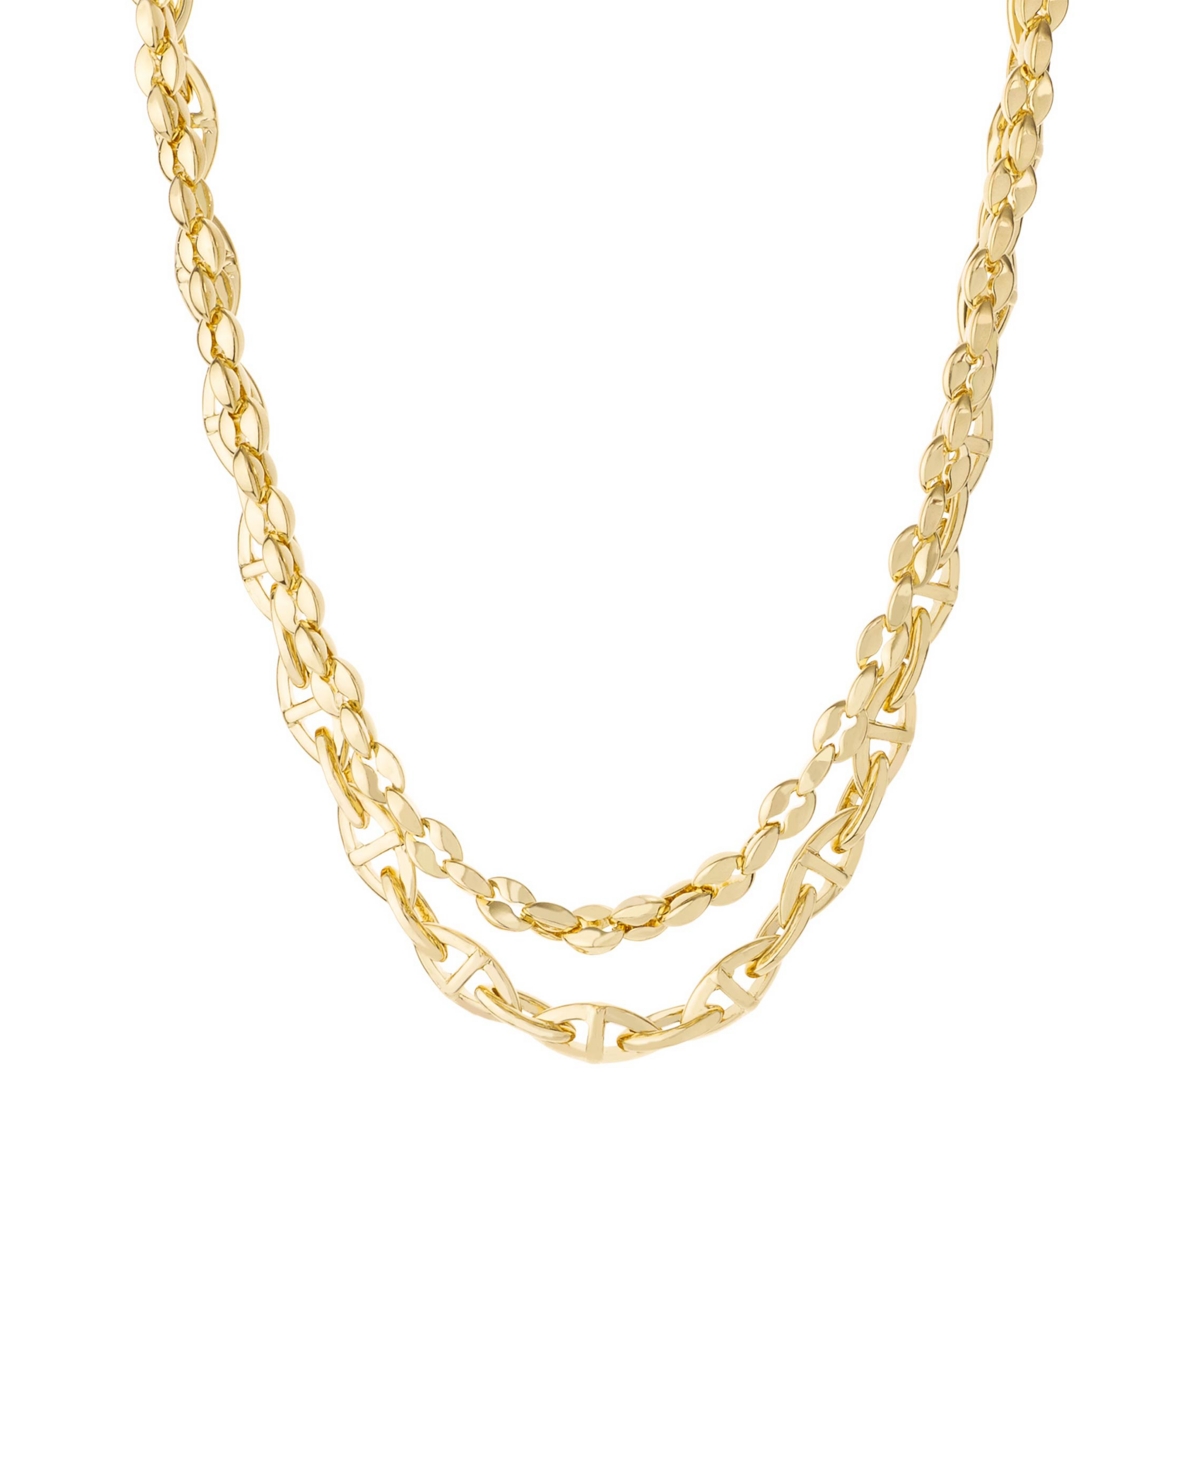 Ettika Golden Rays Linked Chain 18k Gold Plated Necklace Set